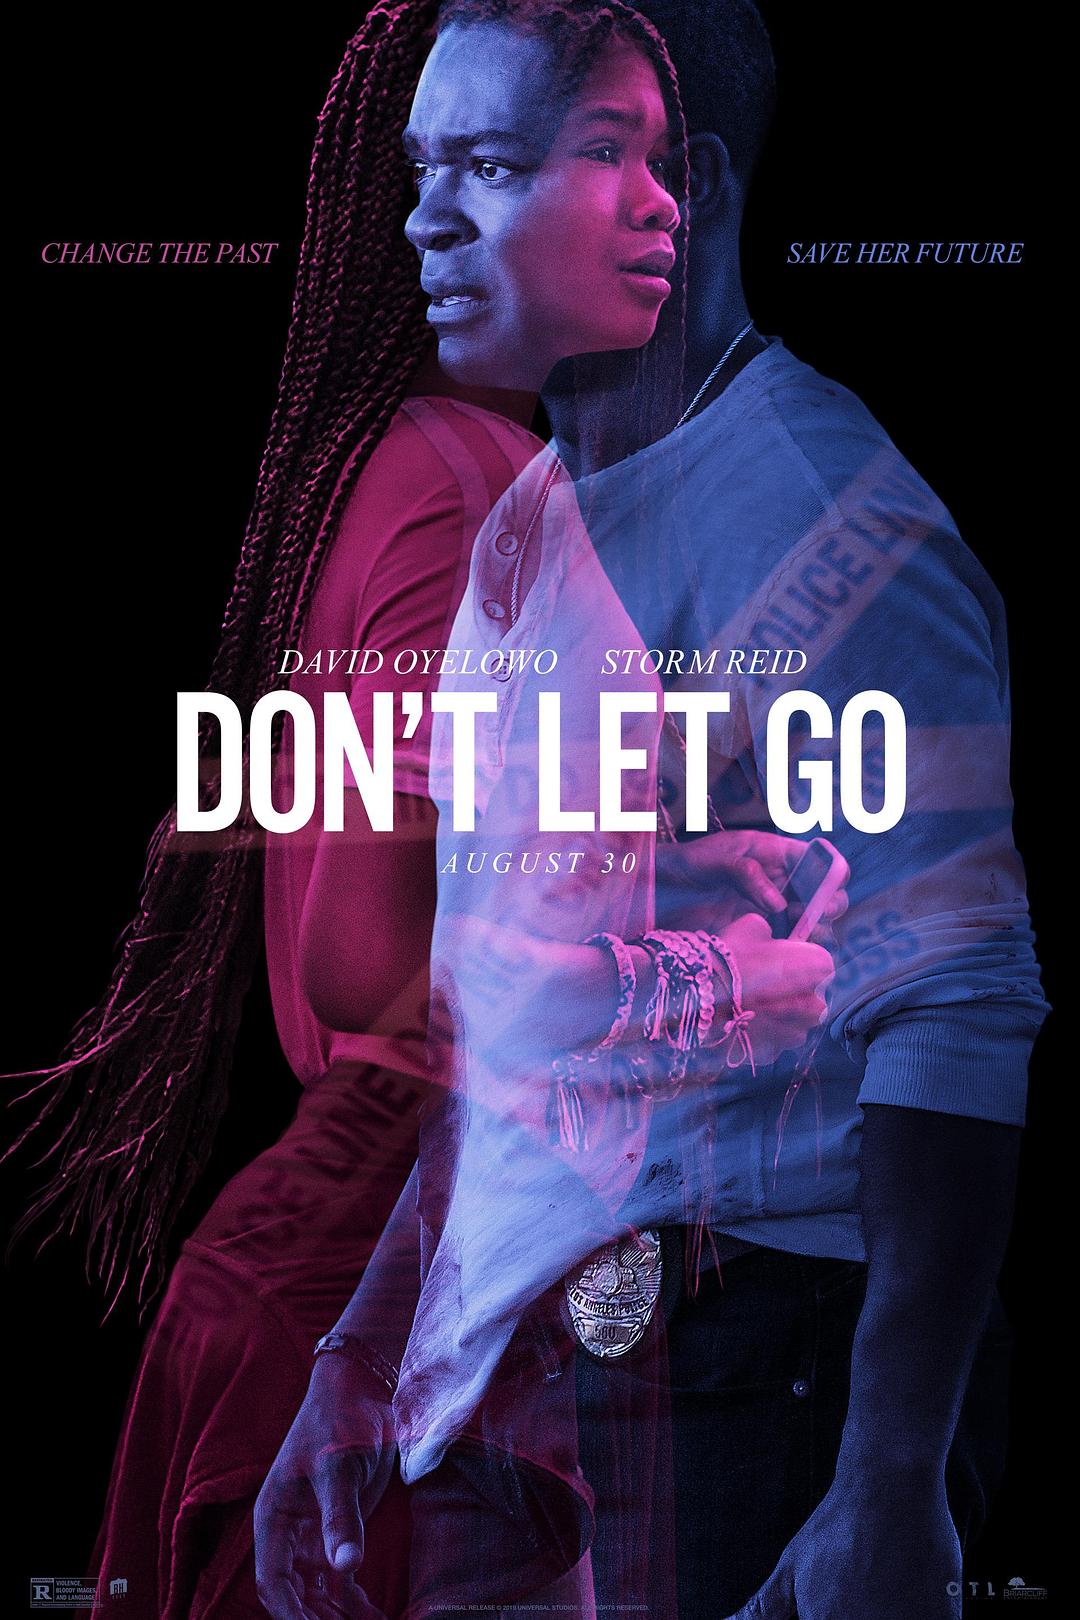  Dont.Let.Go.2019.1080p.BluRay.REMUX.AVC.DTS-HD.MA.5.1-FGT 25.69GB-1.png